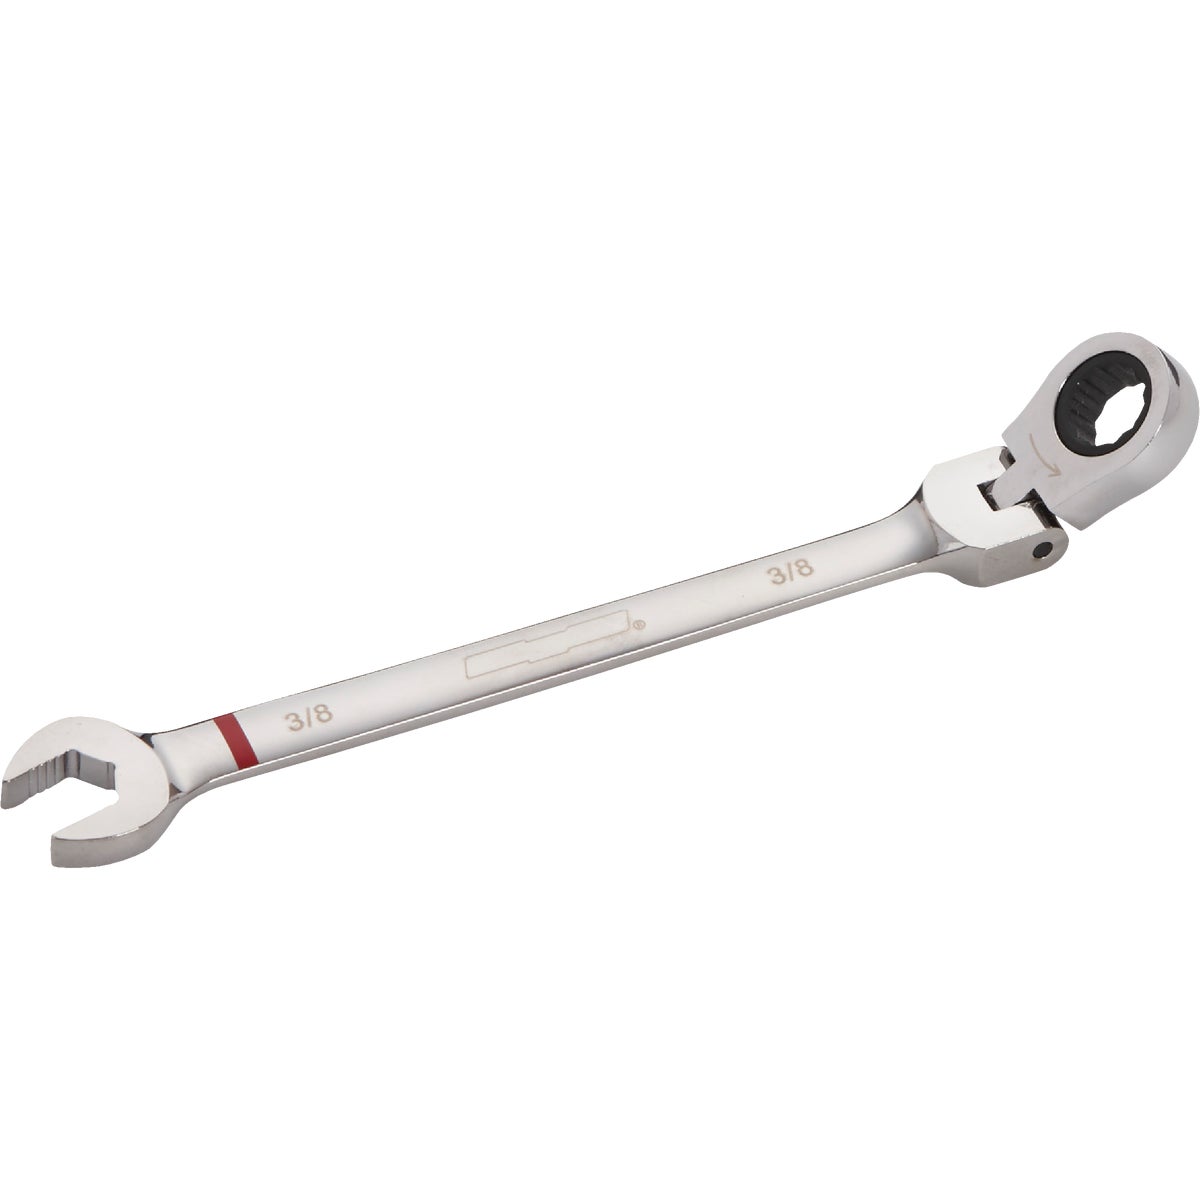 Channellock Standard 3/8 In. 12-Point Ratcheting Flex-Head Wrench